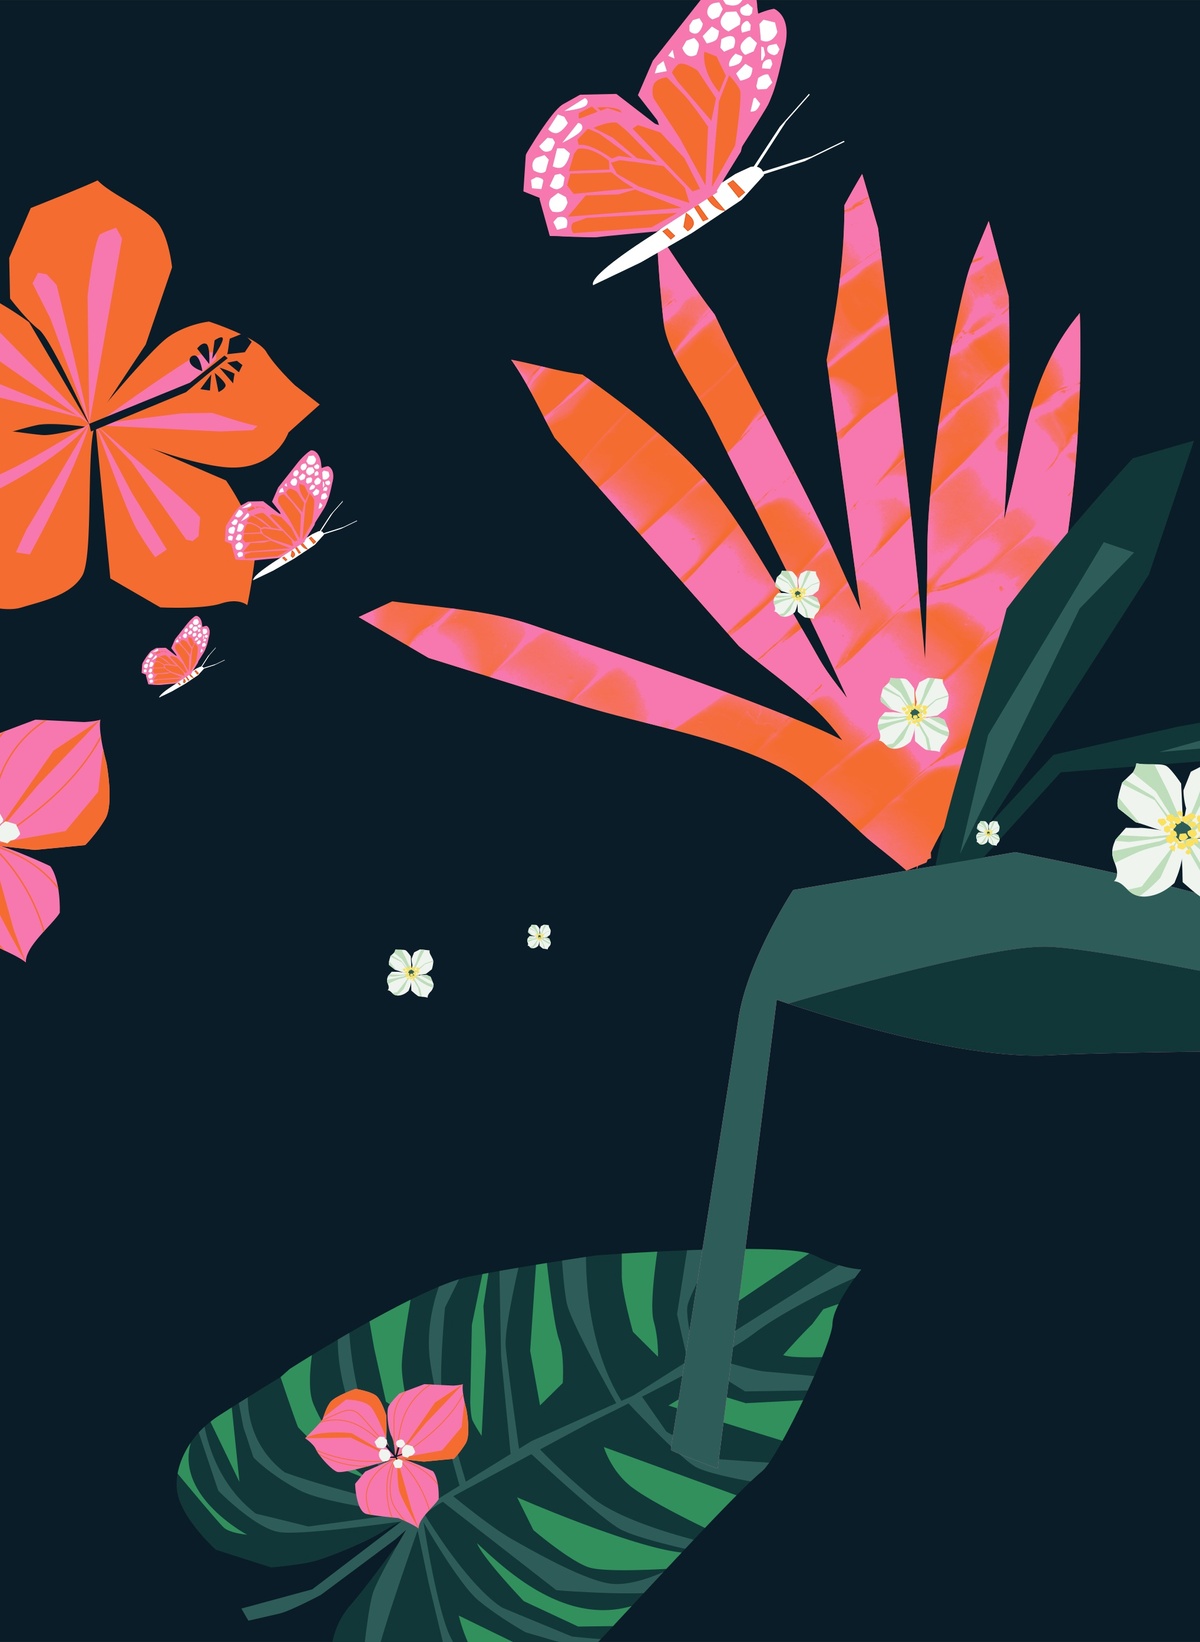 Combination of pink and orange flower and plant illustrations, with a dark background